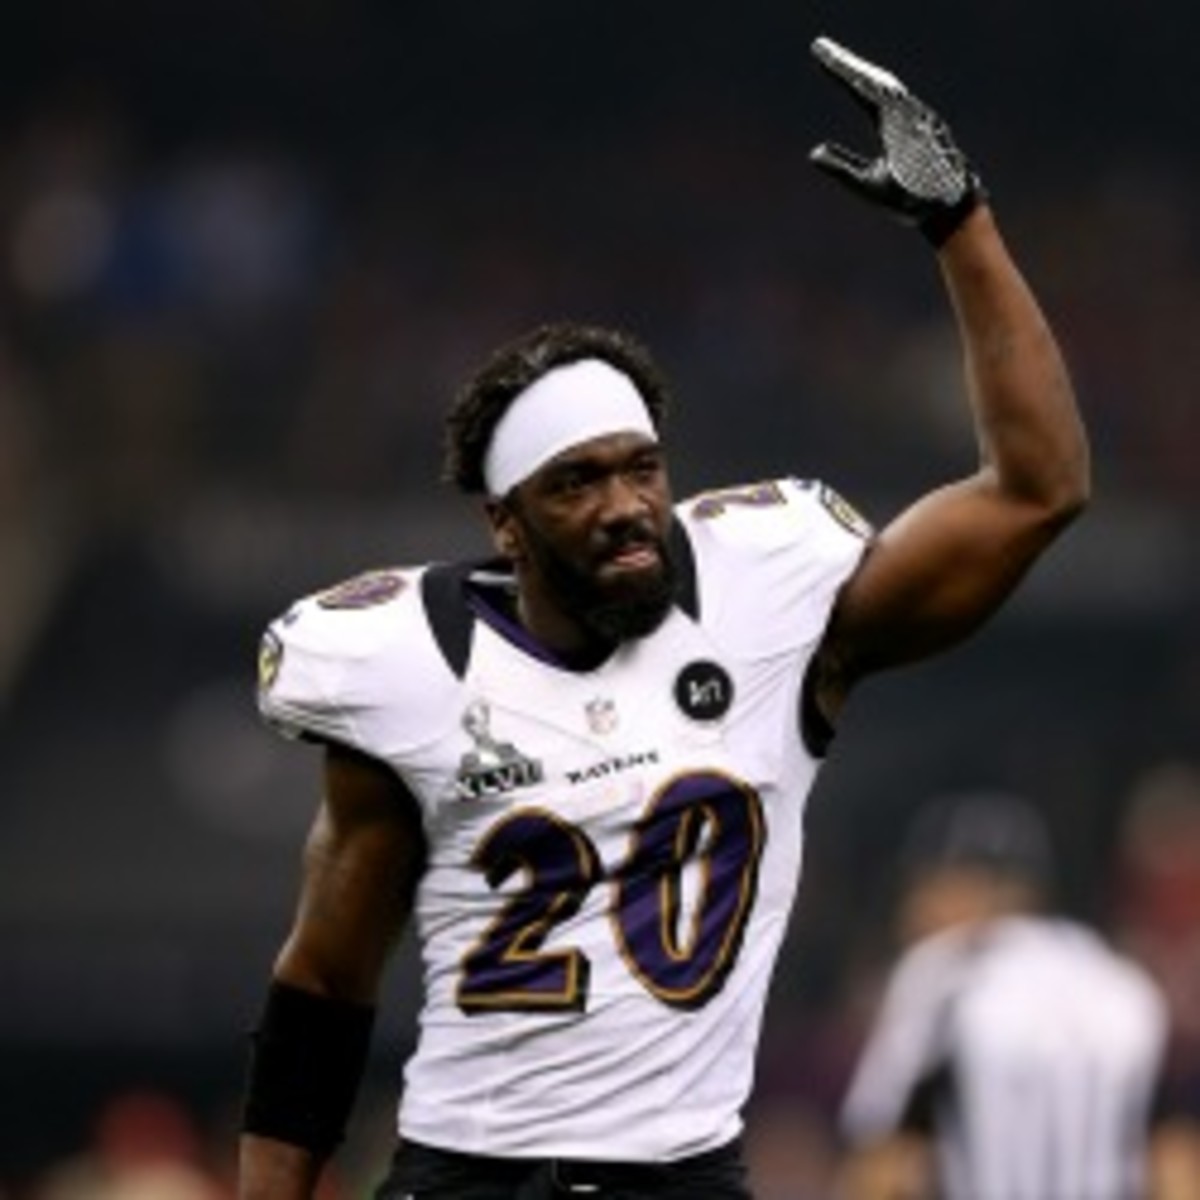 Free-agent Ed Reed is seeking a big payday from the next team that signs him. (Christian Petersen/Getty Images)